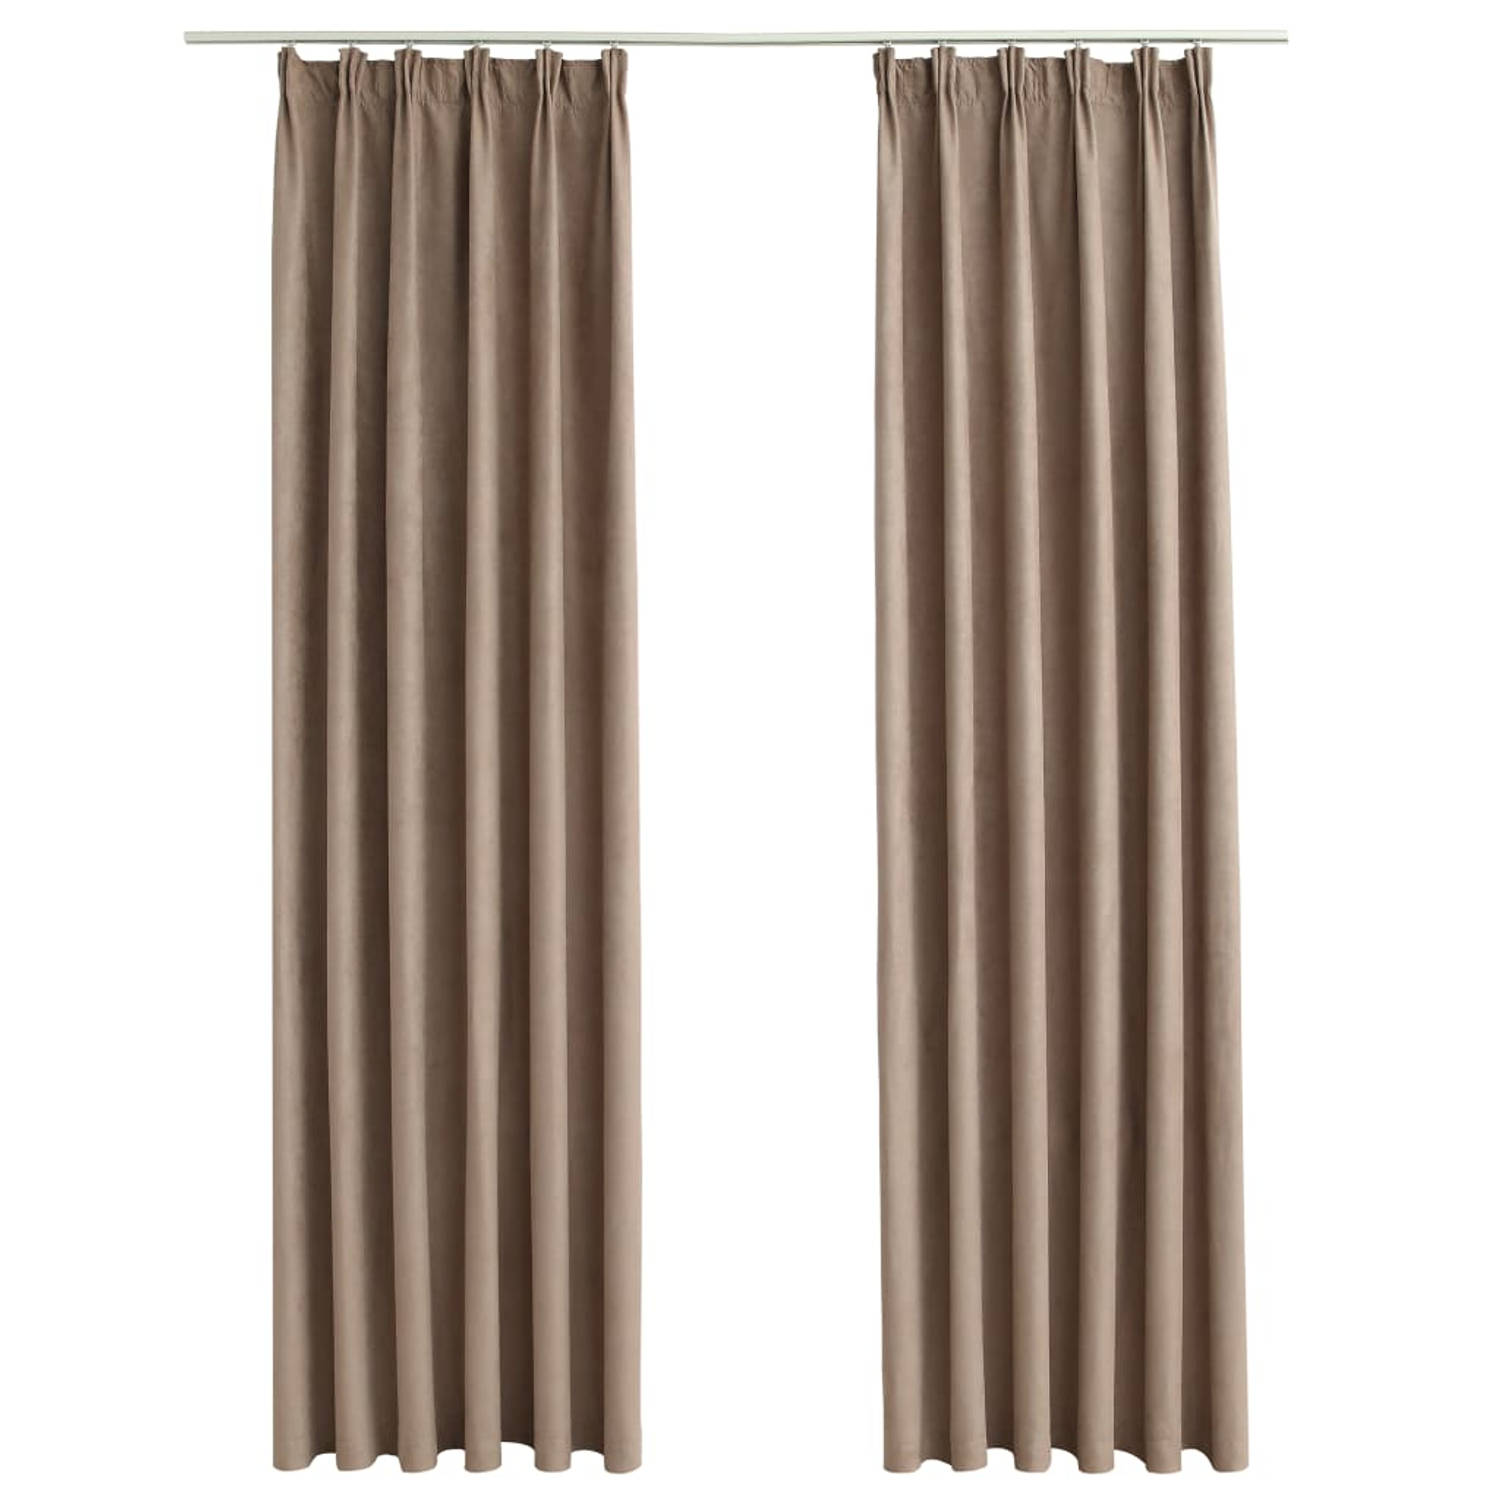 The Living Store Gordijnen Luxe Taupe 140x175 cm Suède-touch Polyester